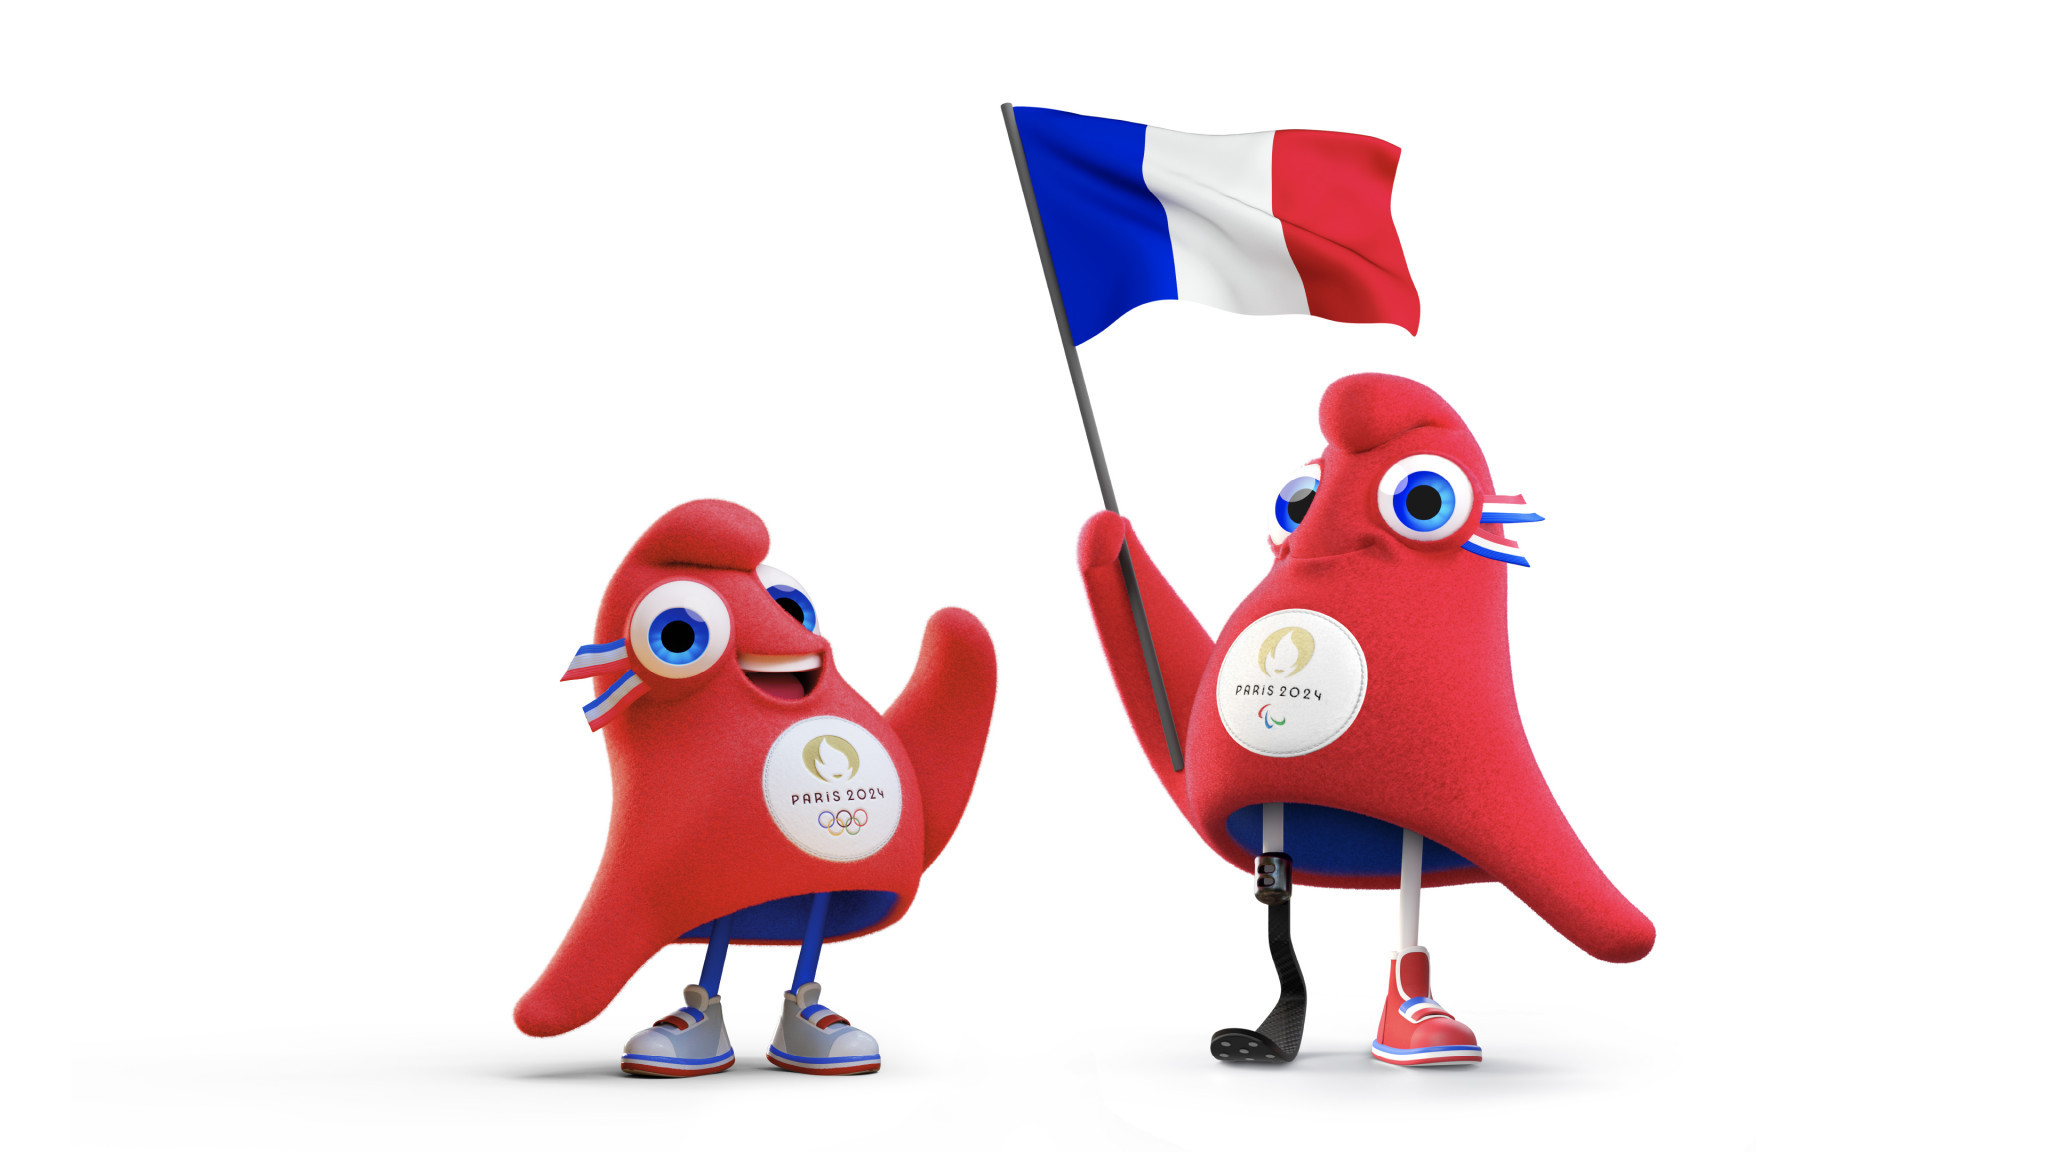 Paris 2024 mascots revealed as Phrygian caps - cute ideals of liberty to power a sporting revolution